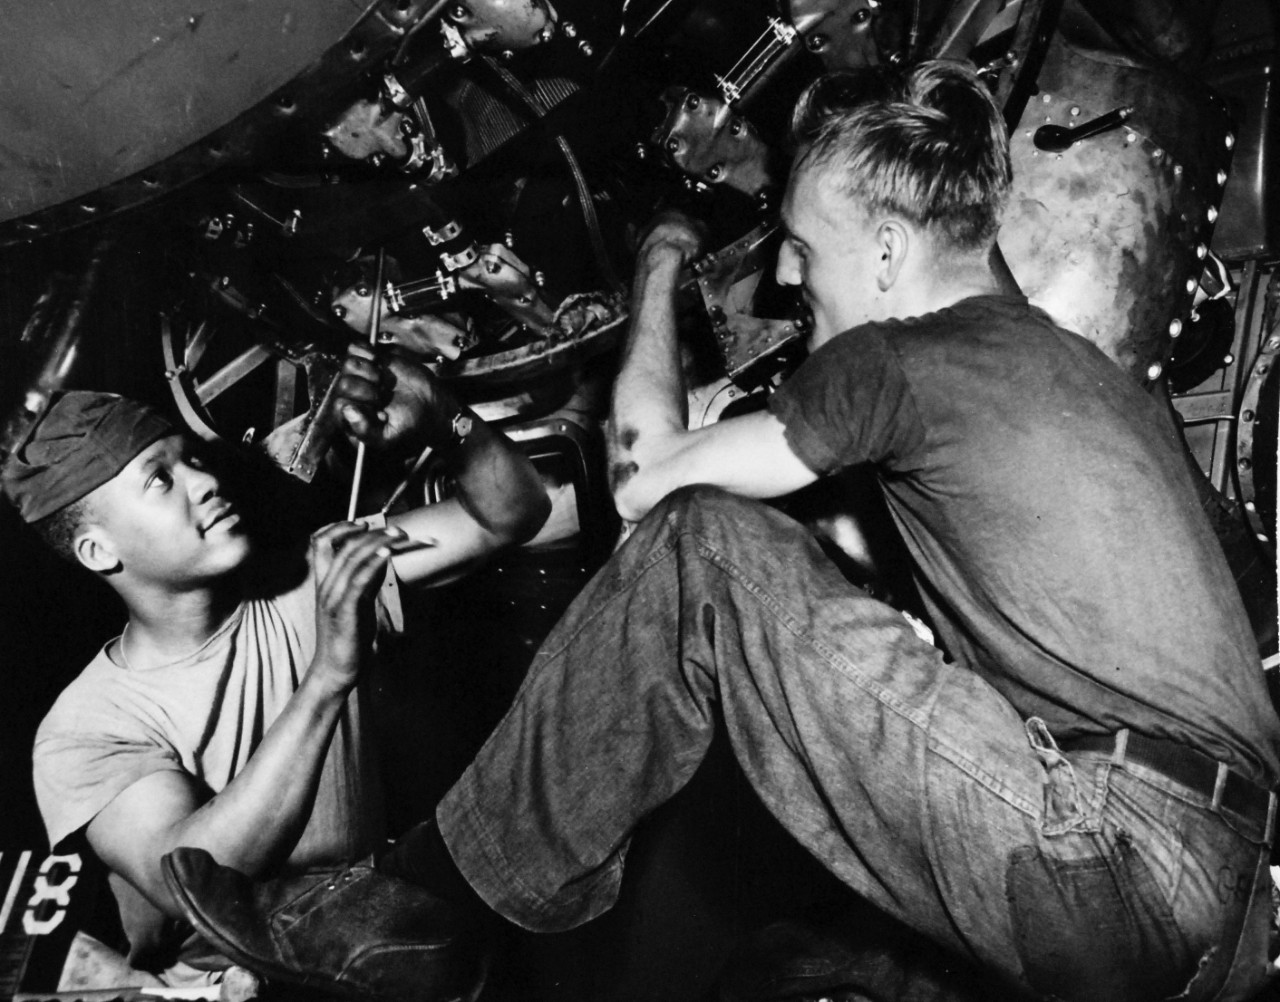 80-G-413544:   USS Coral Sea (CVA 43), April 11, 1949.    AD3 T.W. White, (left), and AD1 Gerhard working on an aircraft.   Official U.S. Navy Photograph, now in the collections of the National Archives.  